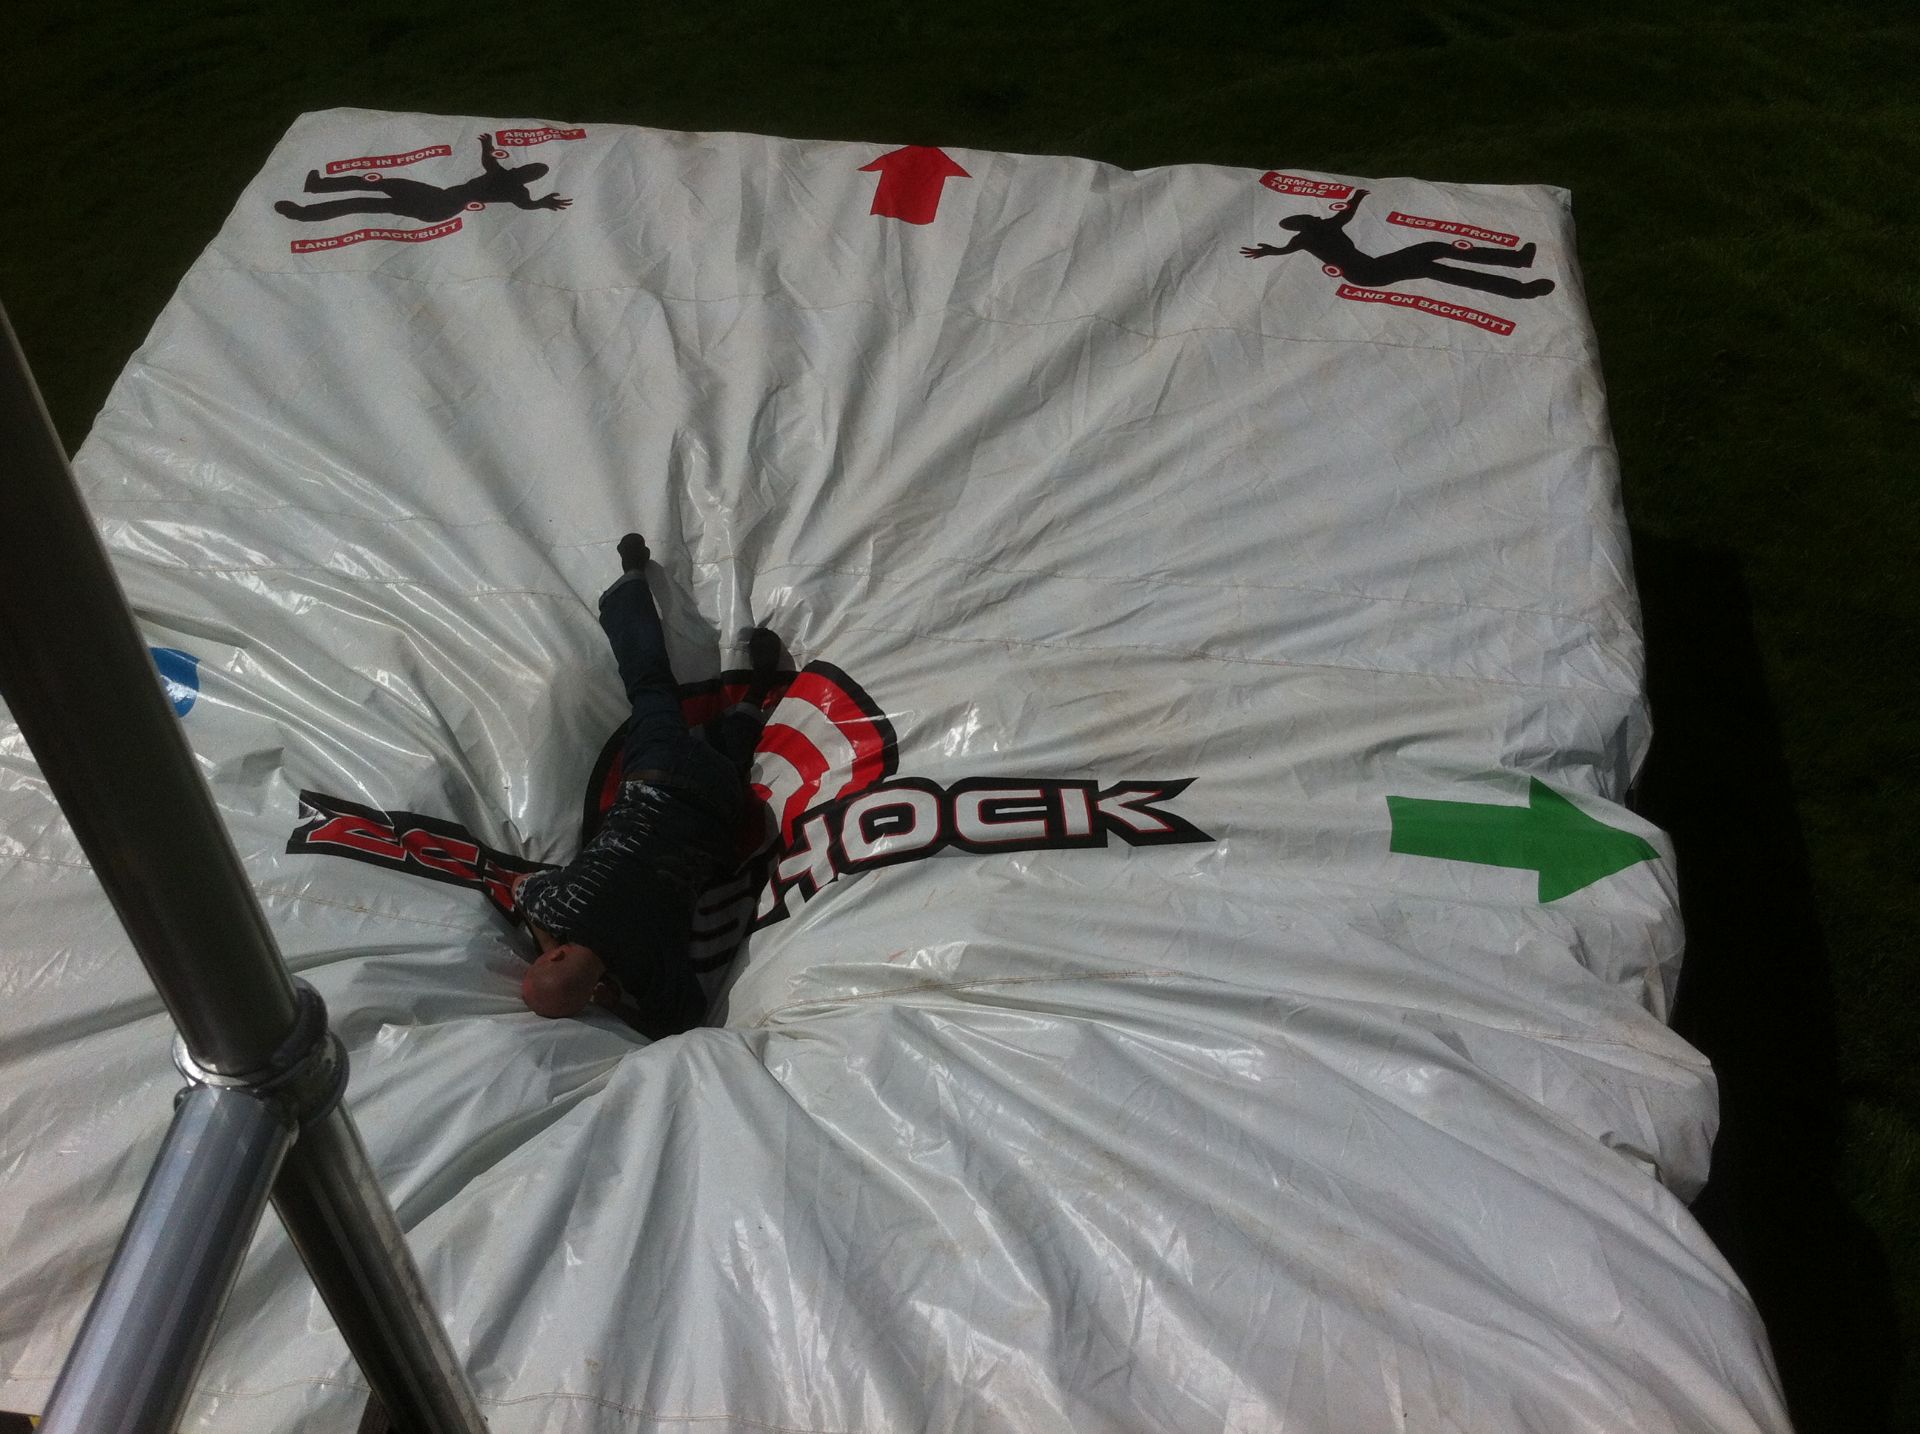 Freefall stunt bag, including tower scaffold - Image 5 of 10